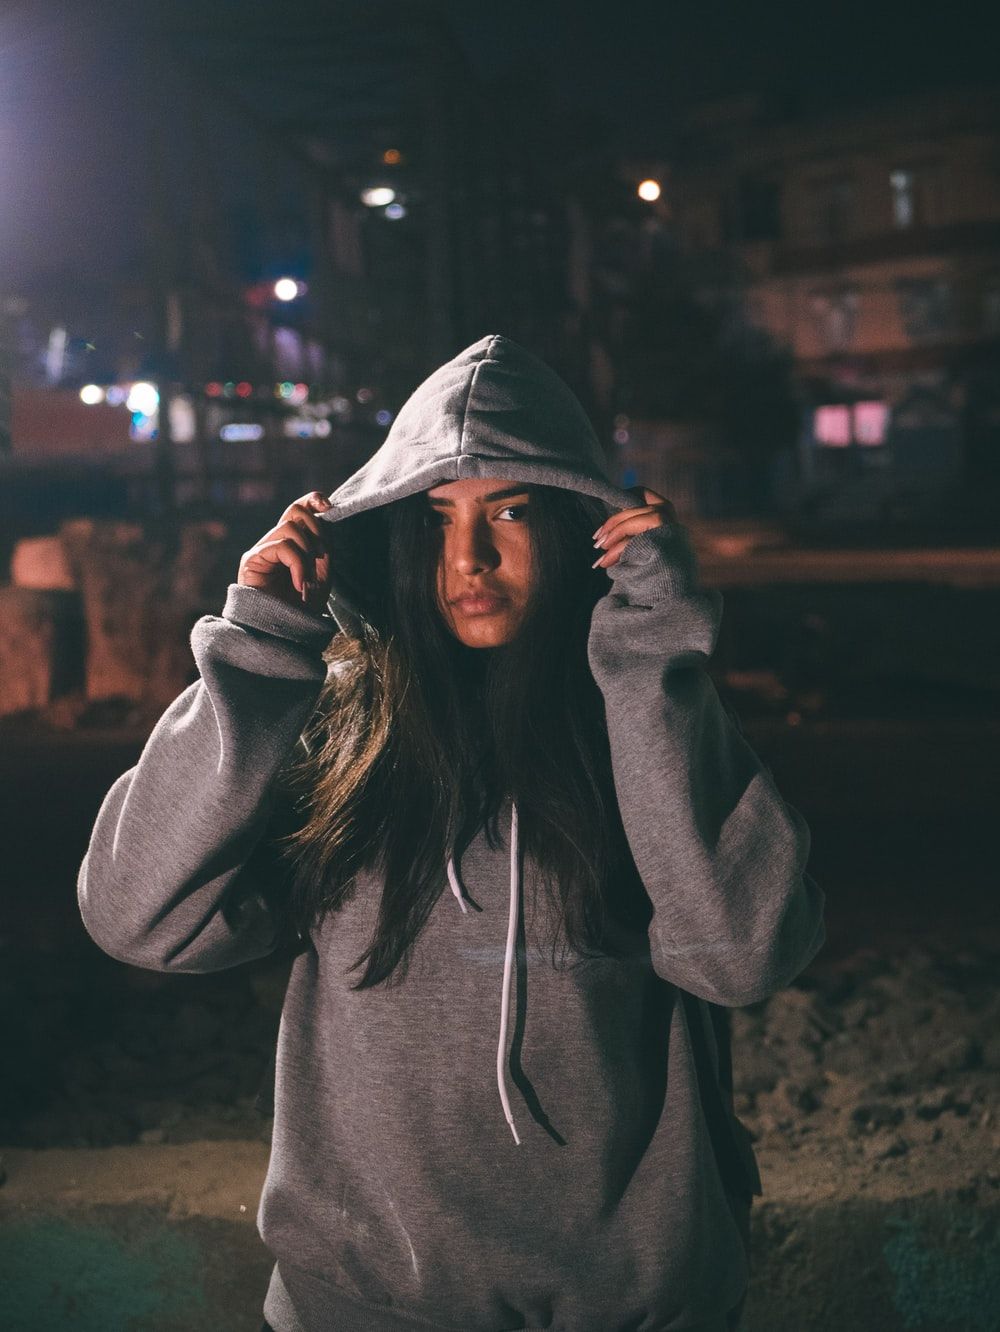 Hoodie Girl Picture. Download Free Image